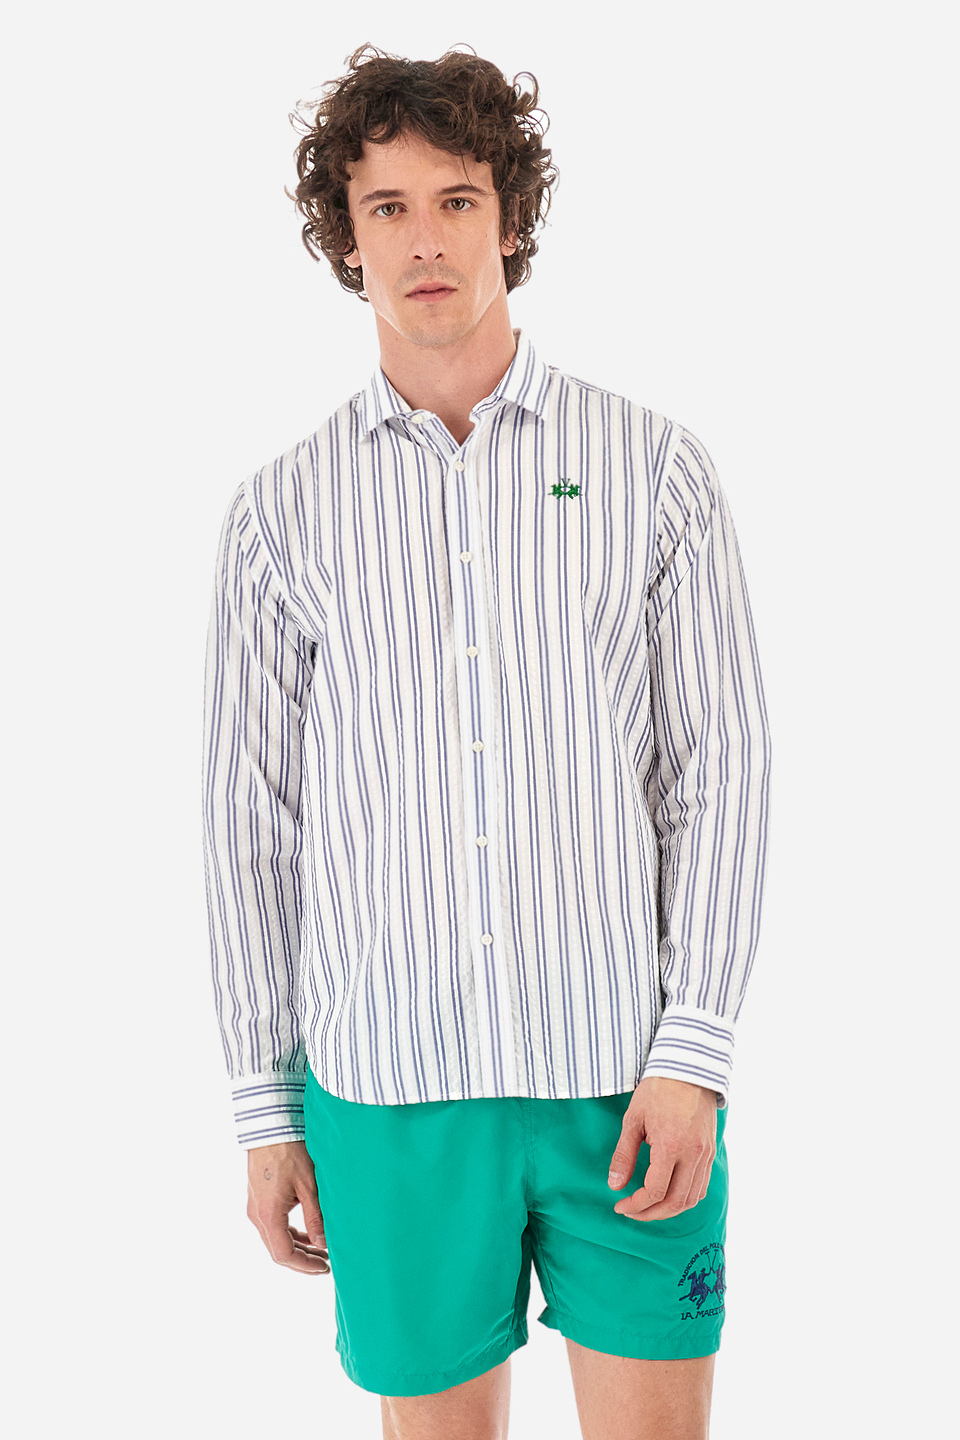 Cotton shirt with a striped patterned - Innocent | La Martina - Official Online Shop